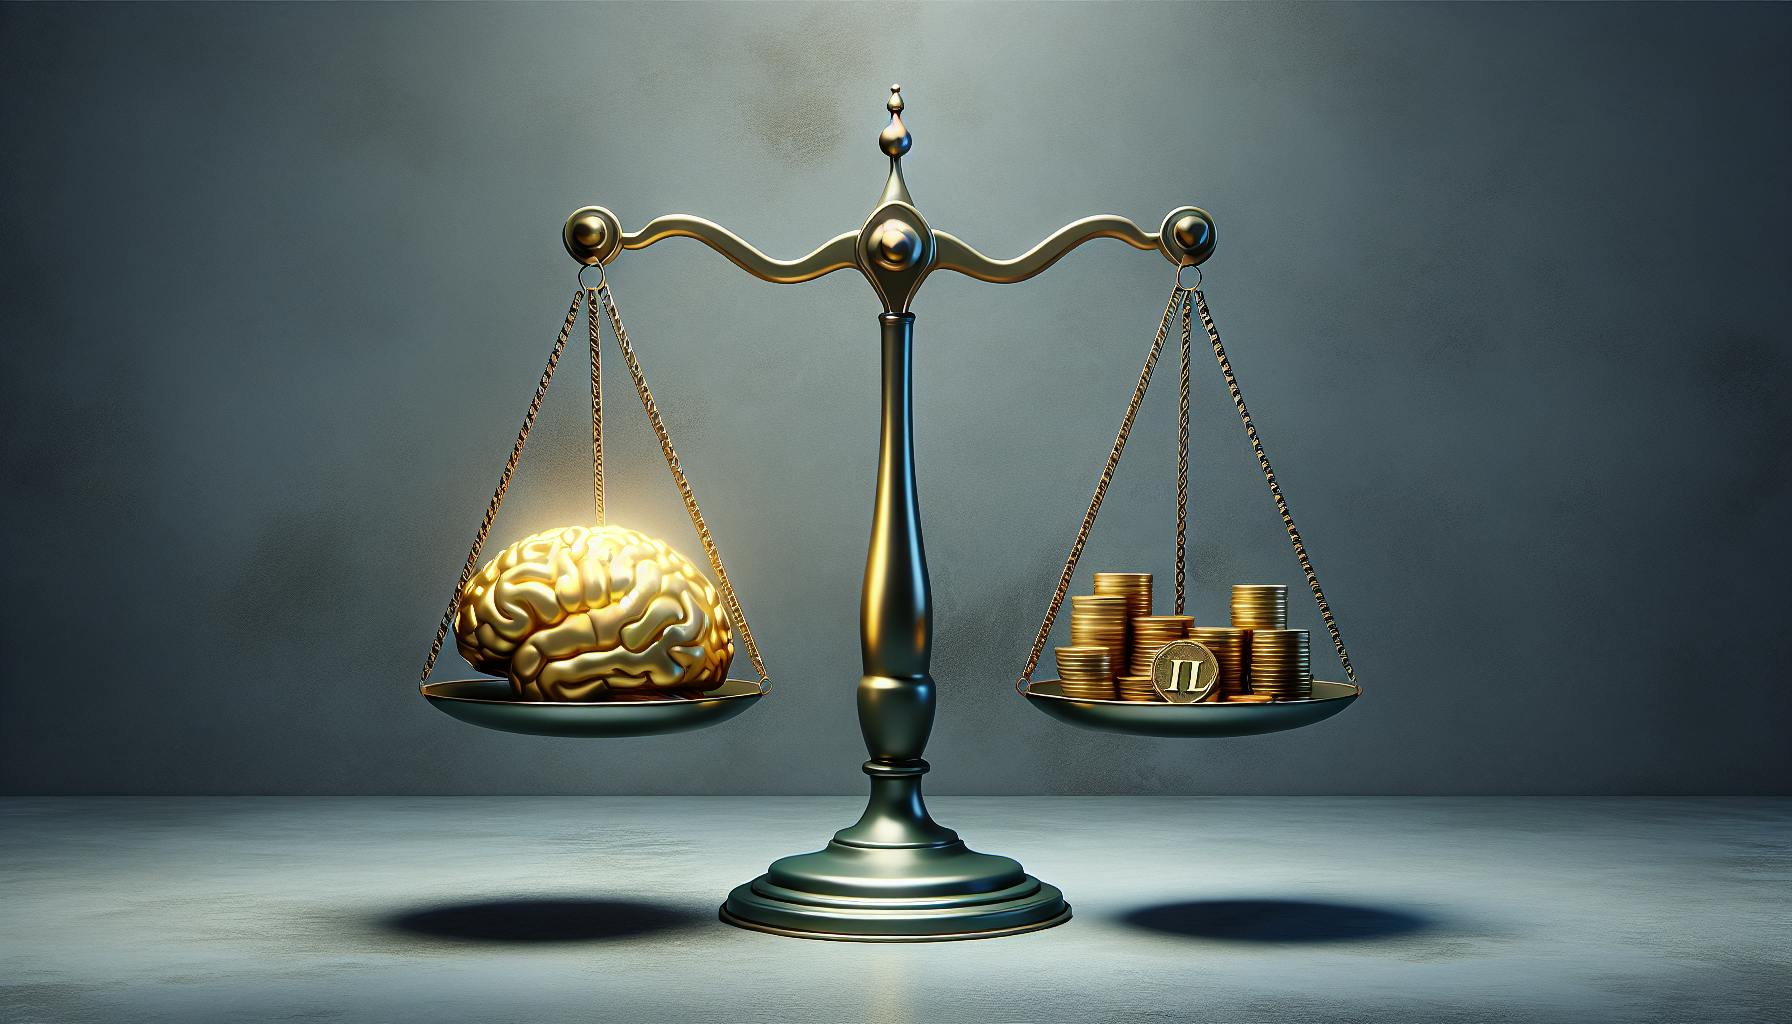 Intellectual Property Paralegal Salary in the US: Assessing the Value of Specialized Legal Knowledge